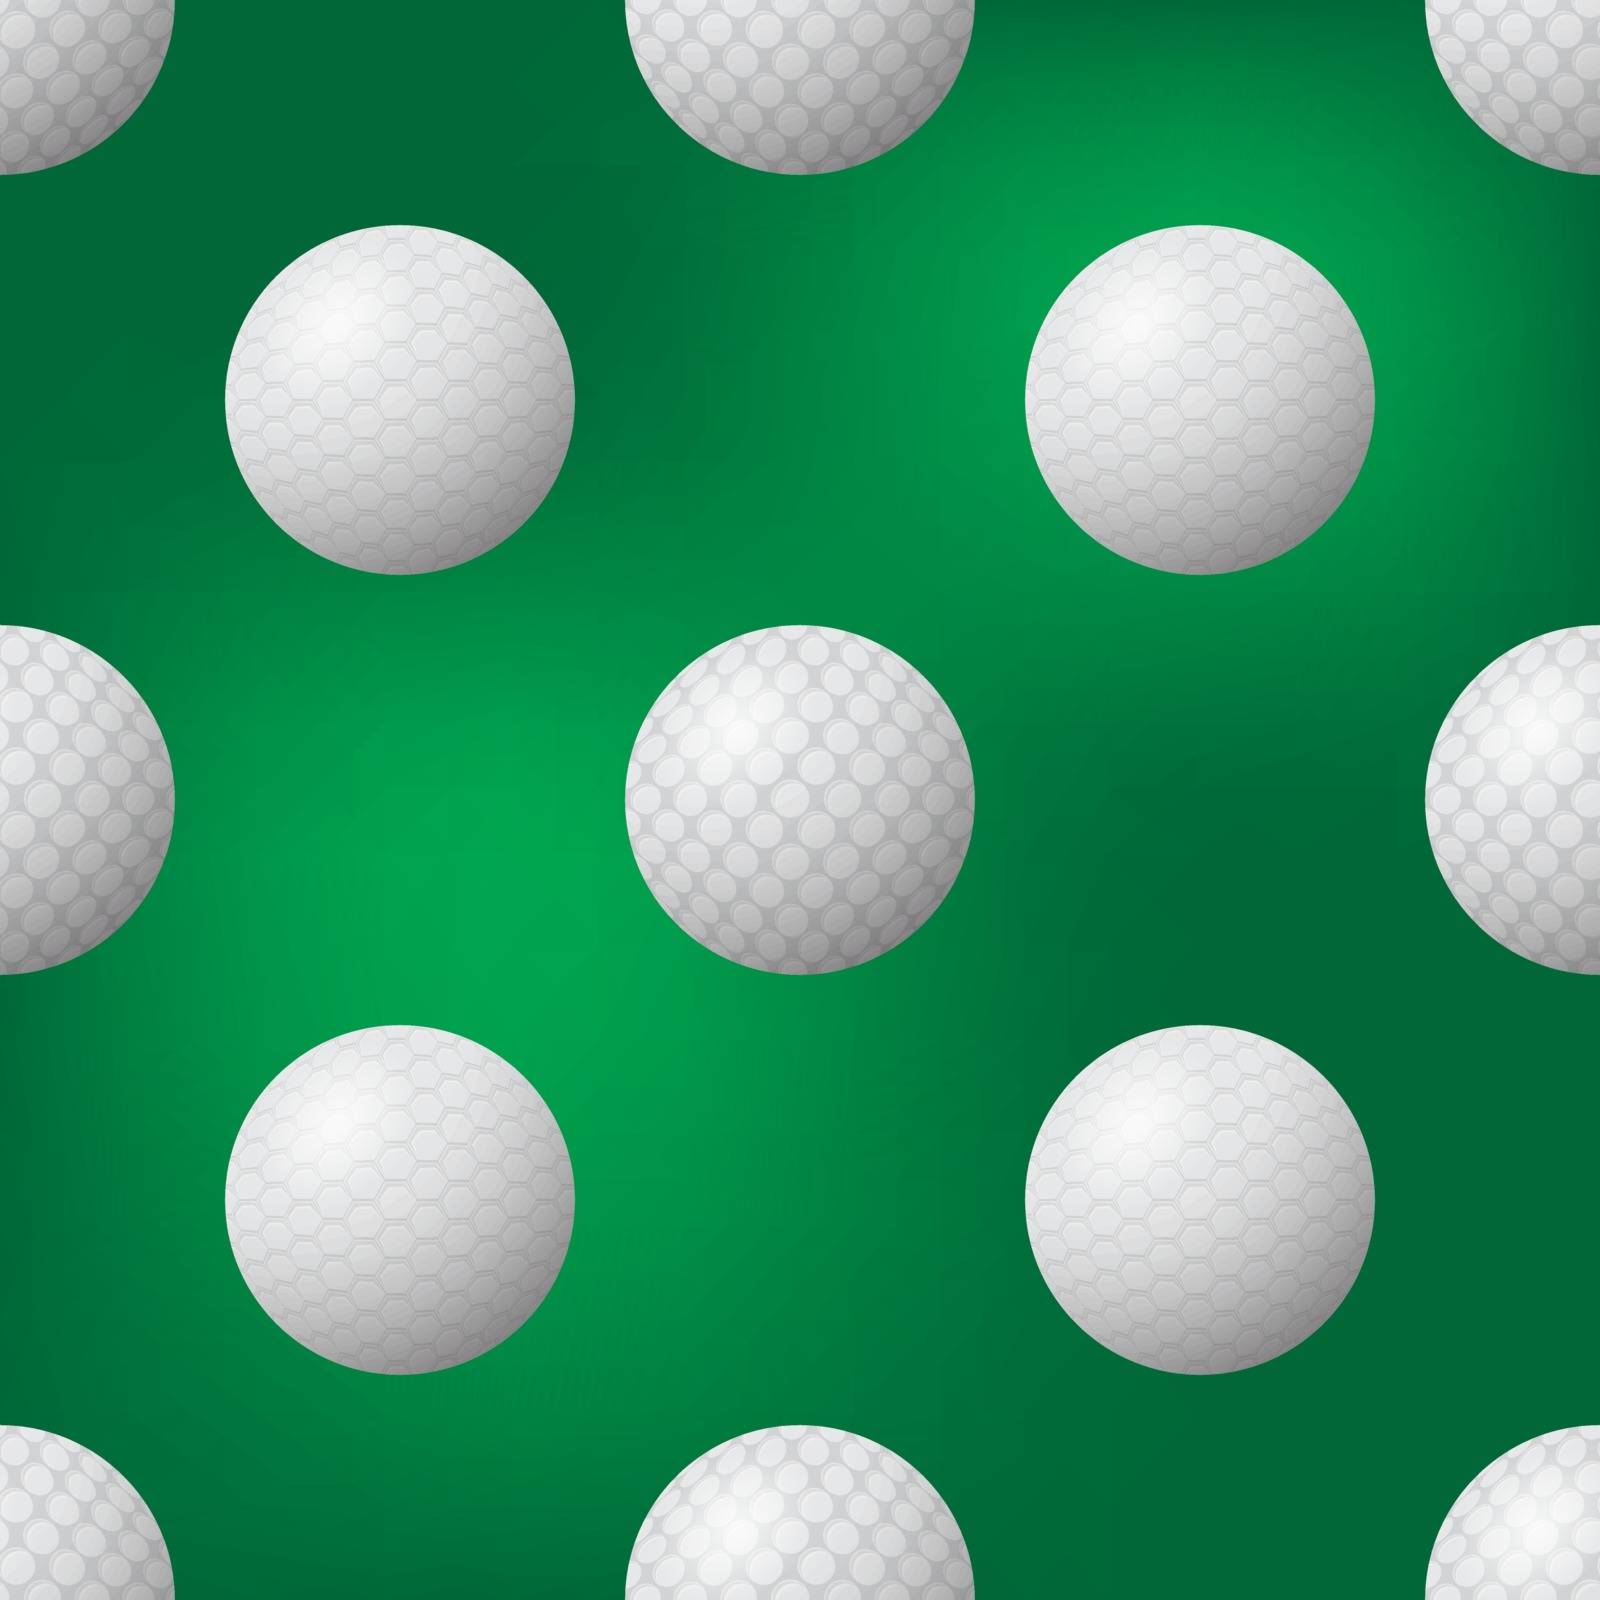 Realistic Golf Ball Icon Seamless Pattern on Blurred Green Background by valeo5